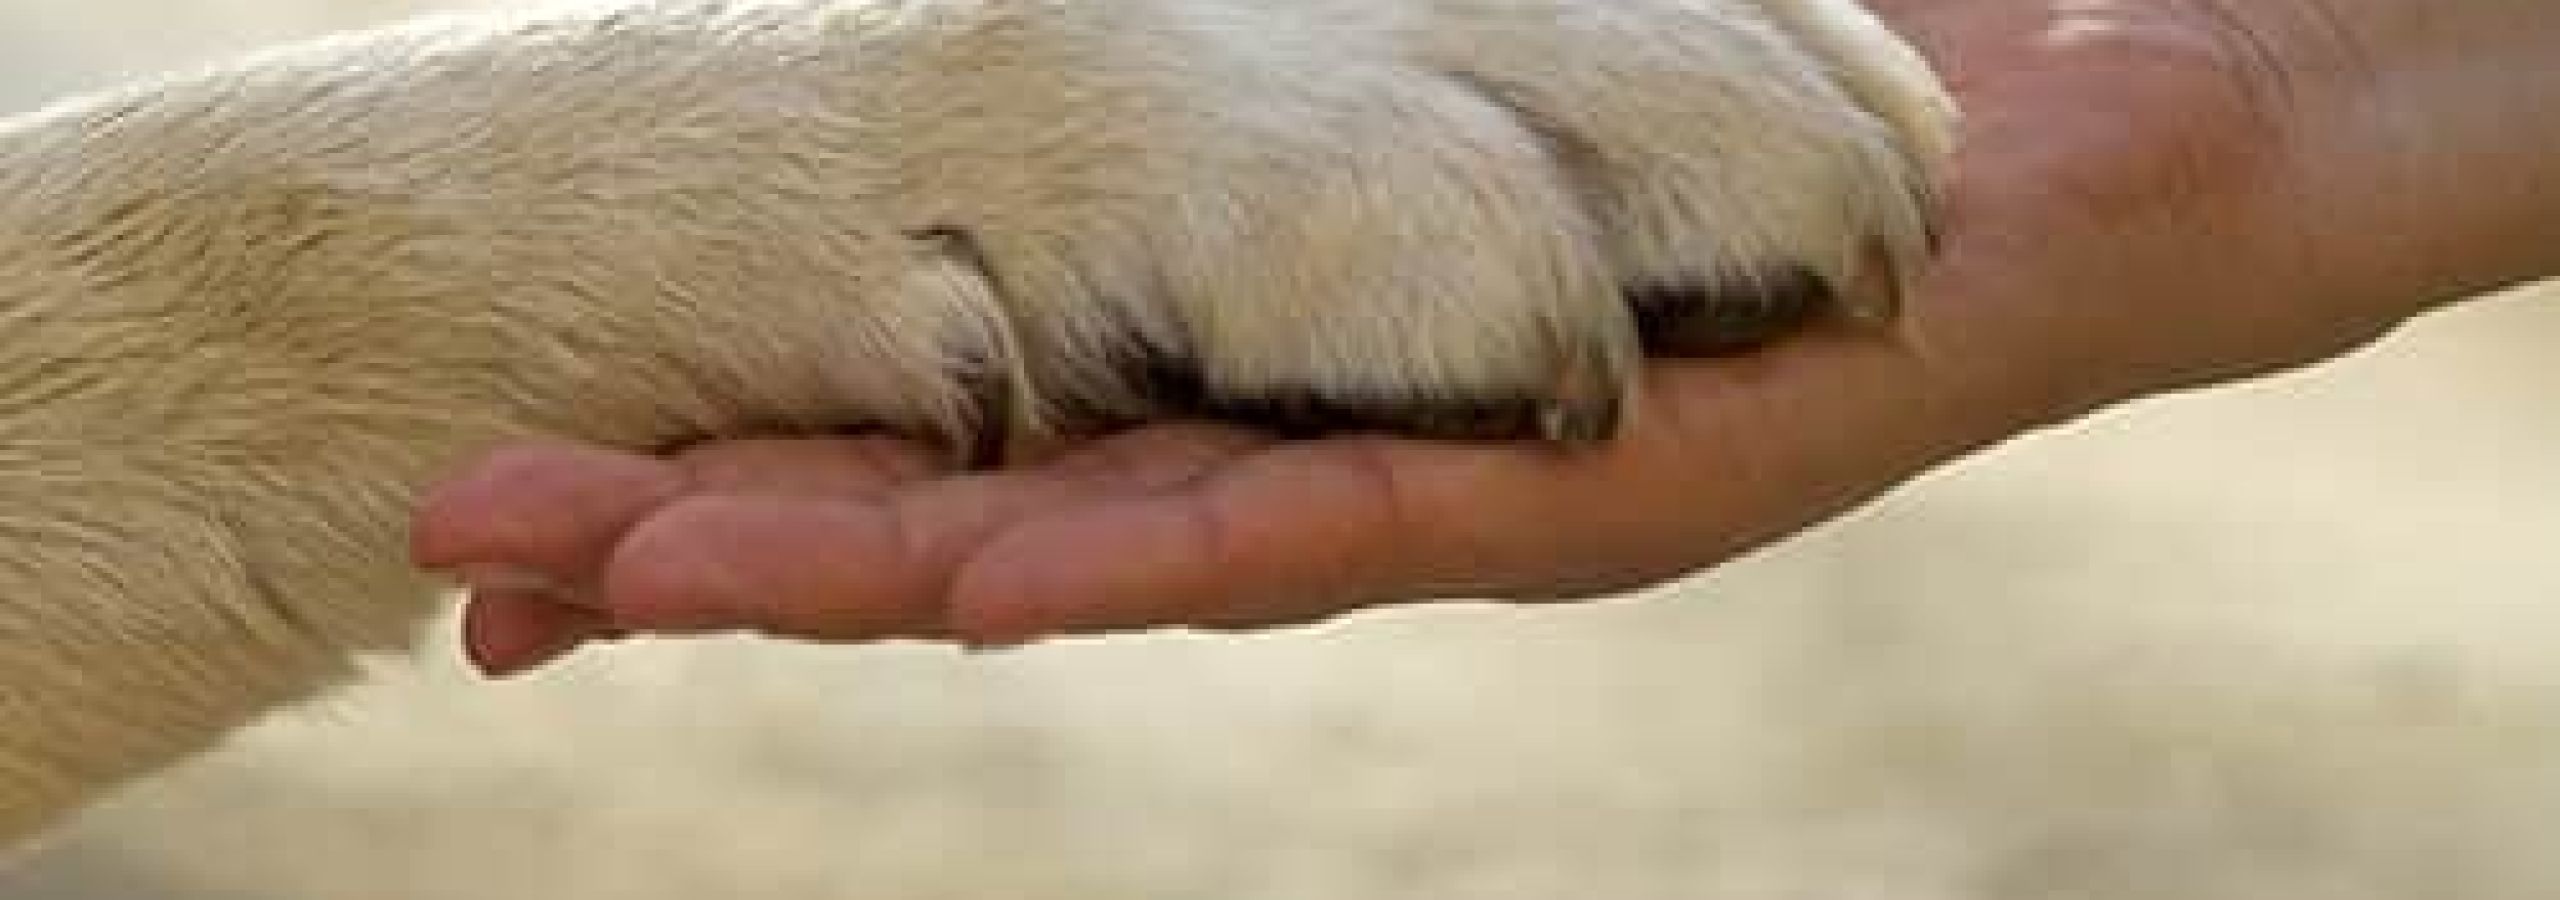 holding dogs paw